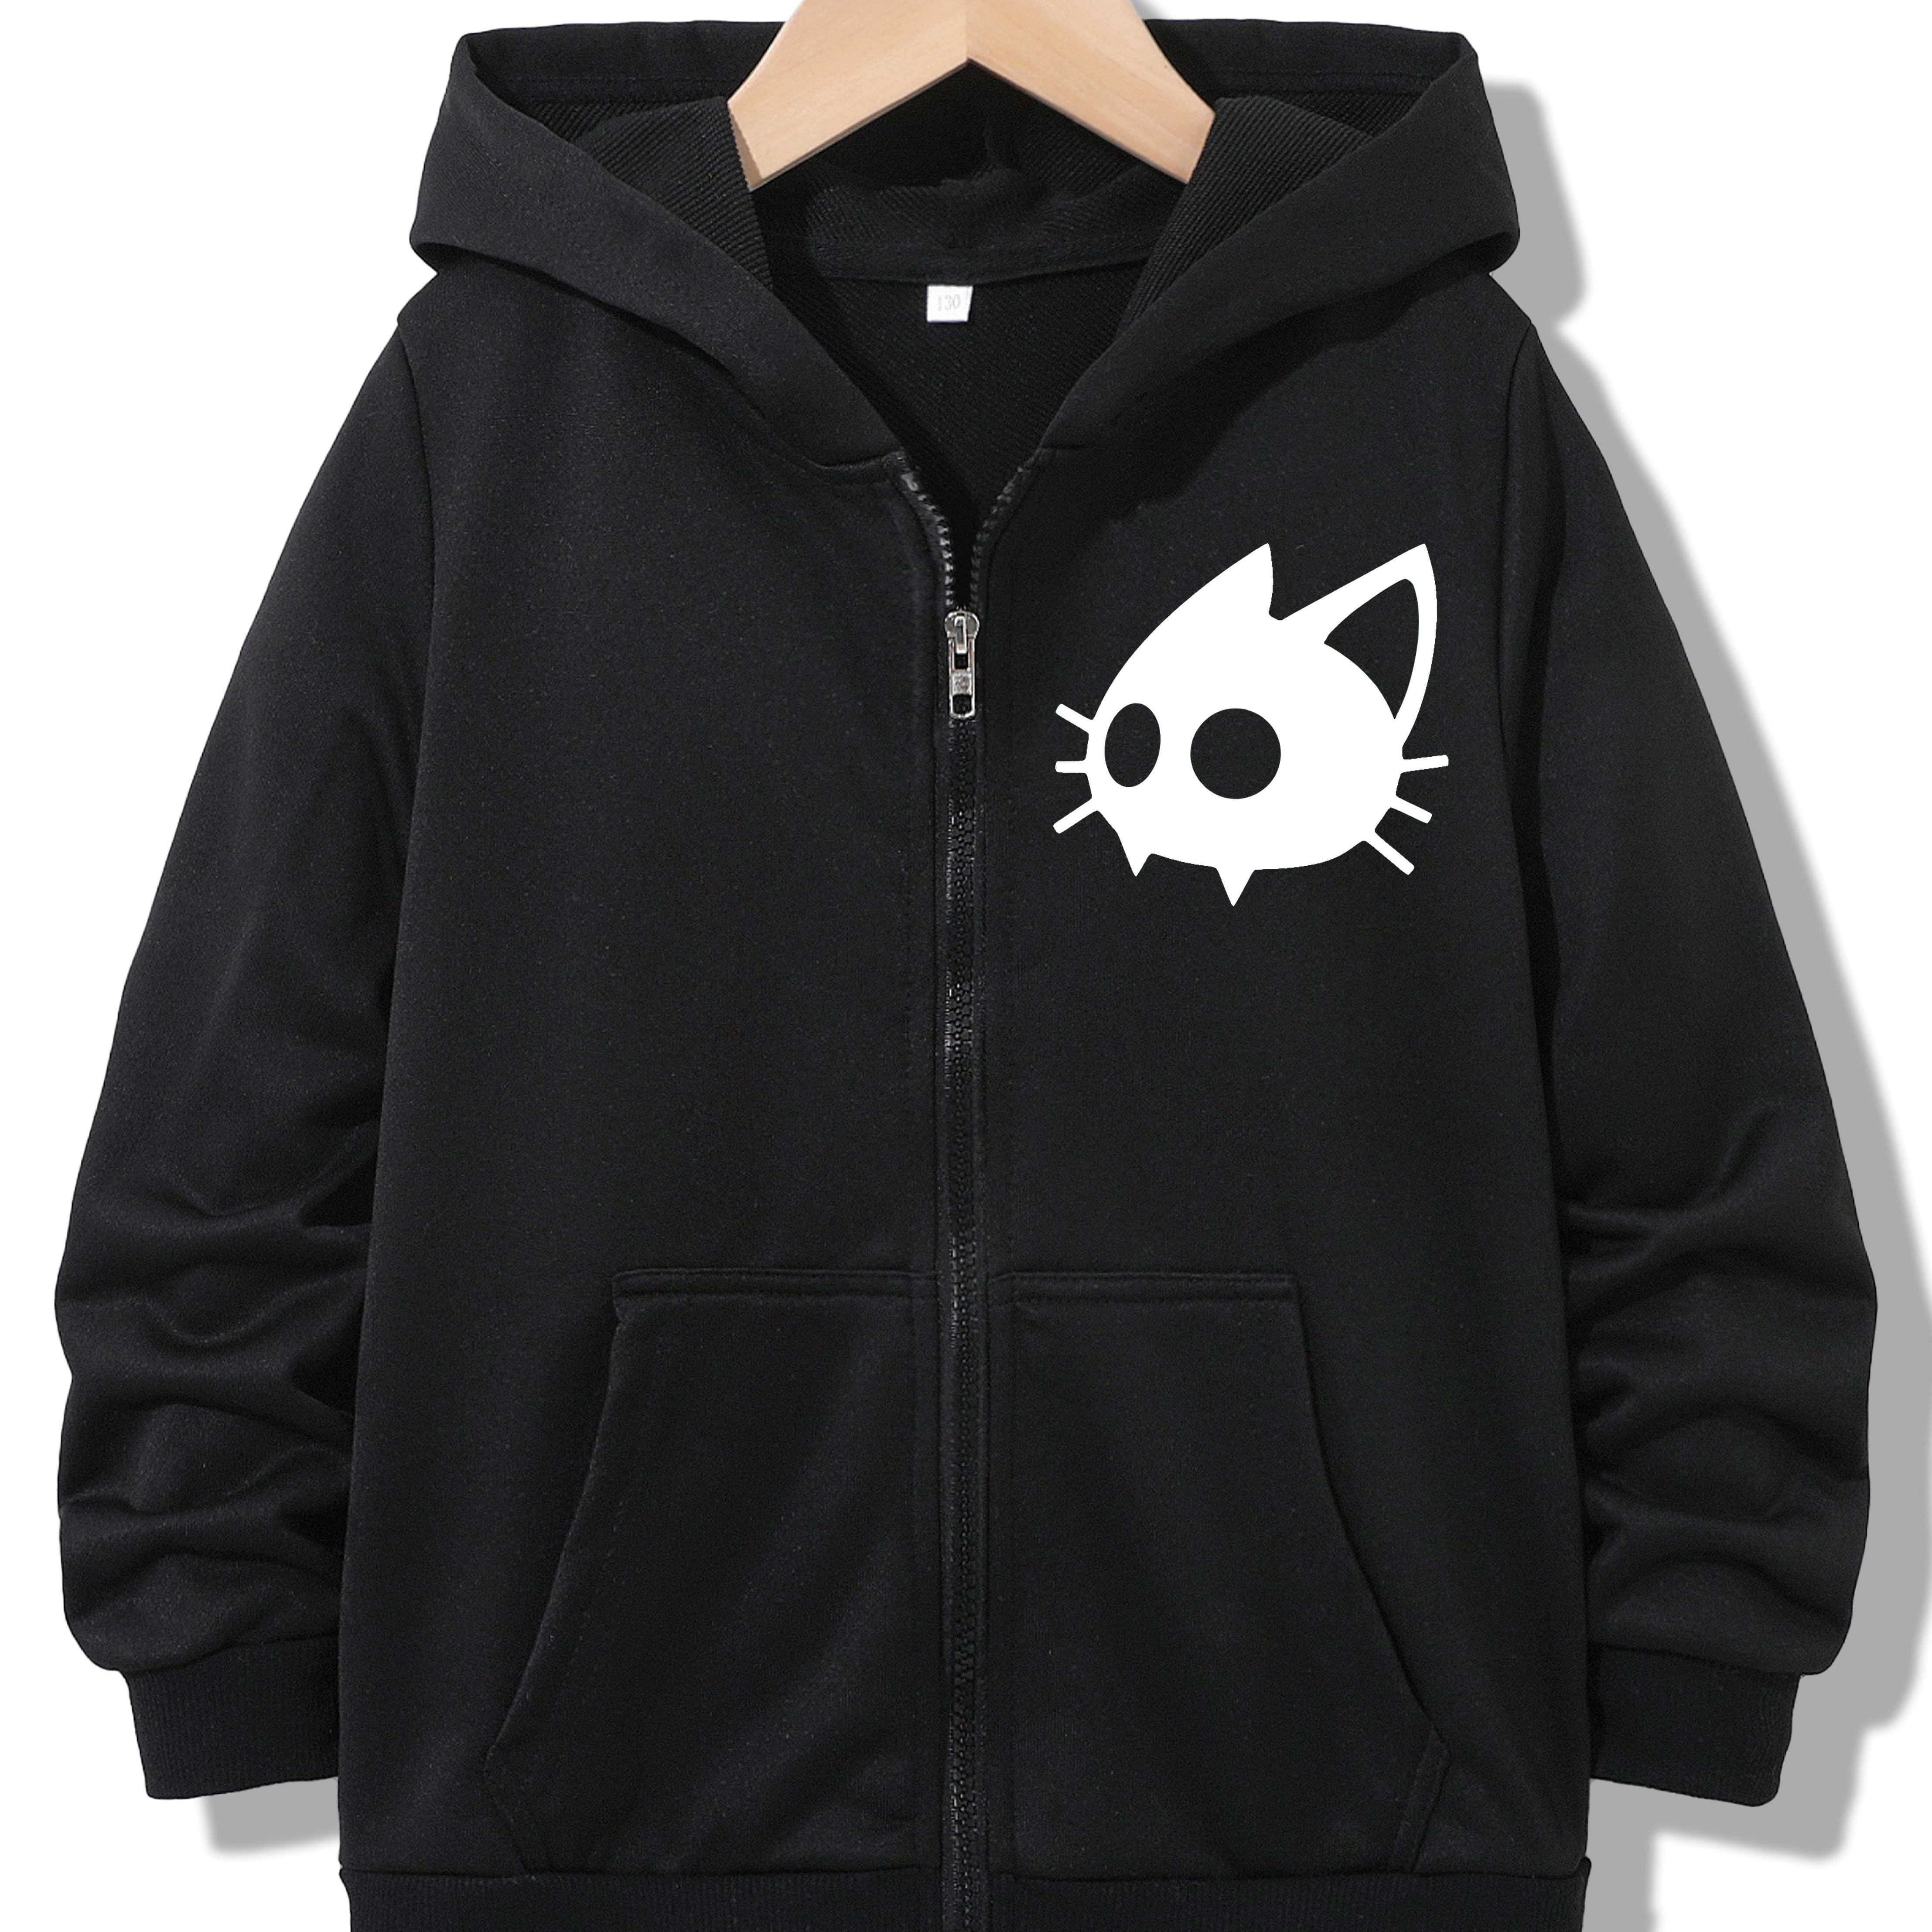 

Unisex Teen Fashion Hoodie Jacket - Soft & Comfy, Zip-up With Trendy Cat Print Design For Spring/fall